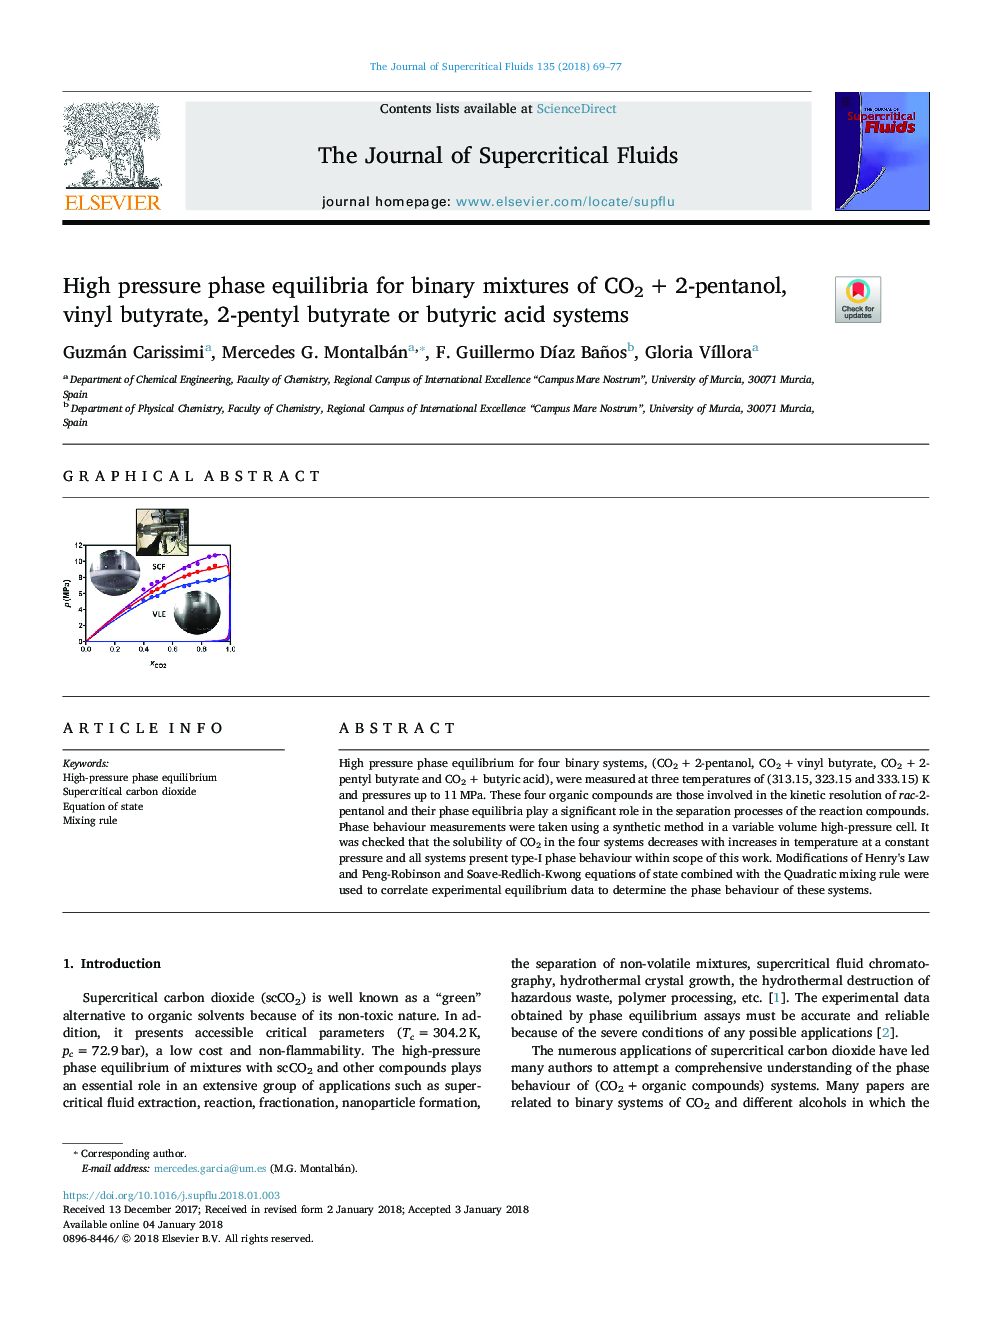 High pressure phase equilibria for binary mixtures of CO2â¯+â¯2-pentanol, vinyl butyrate, 2-pentyl butyrate or butyric acid systems